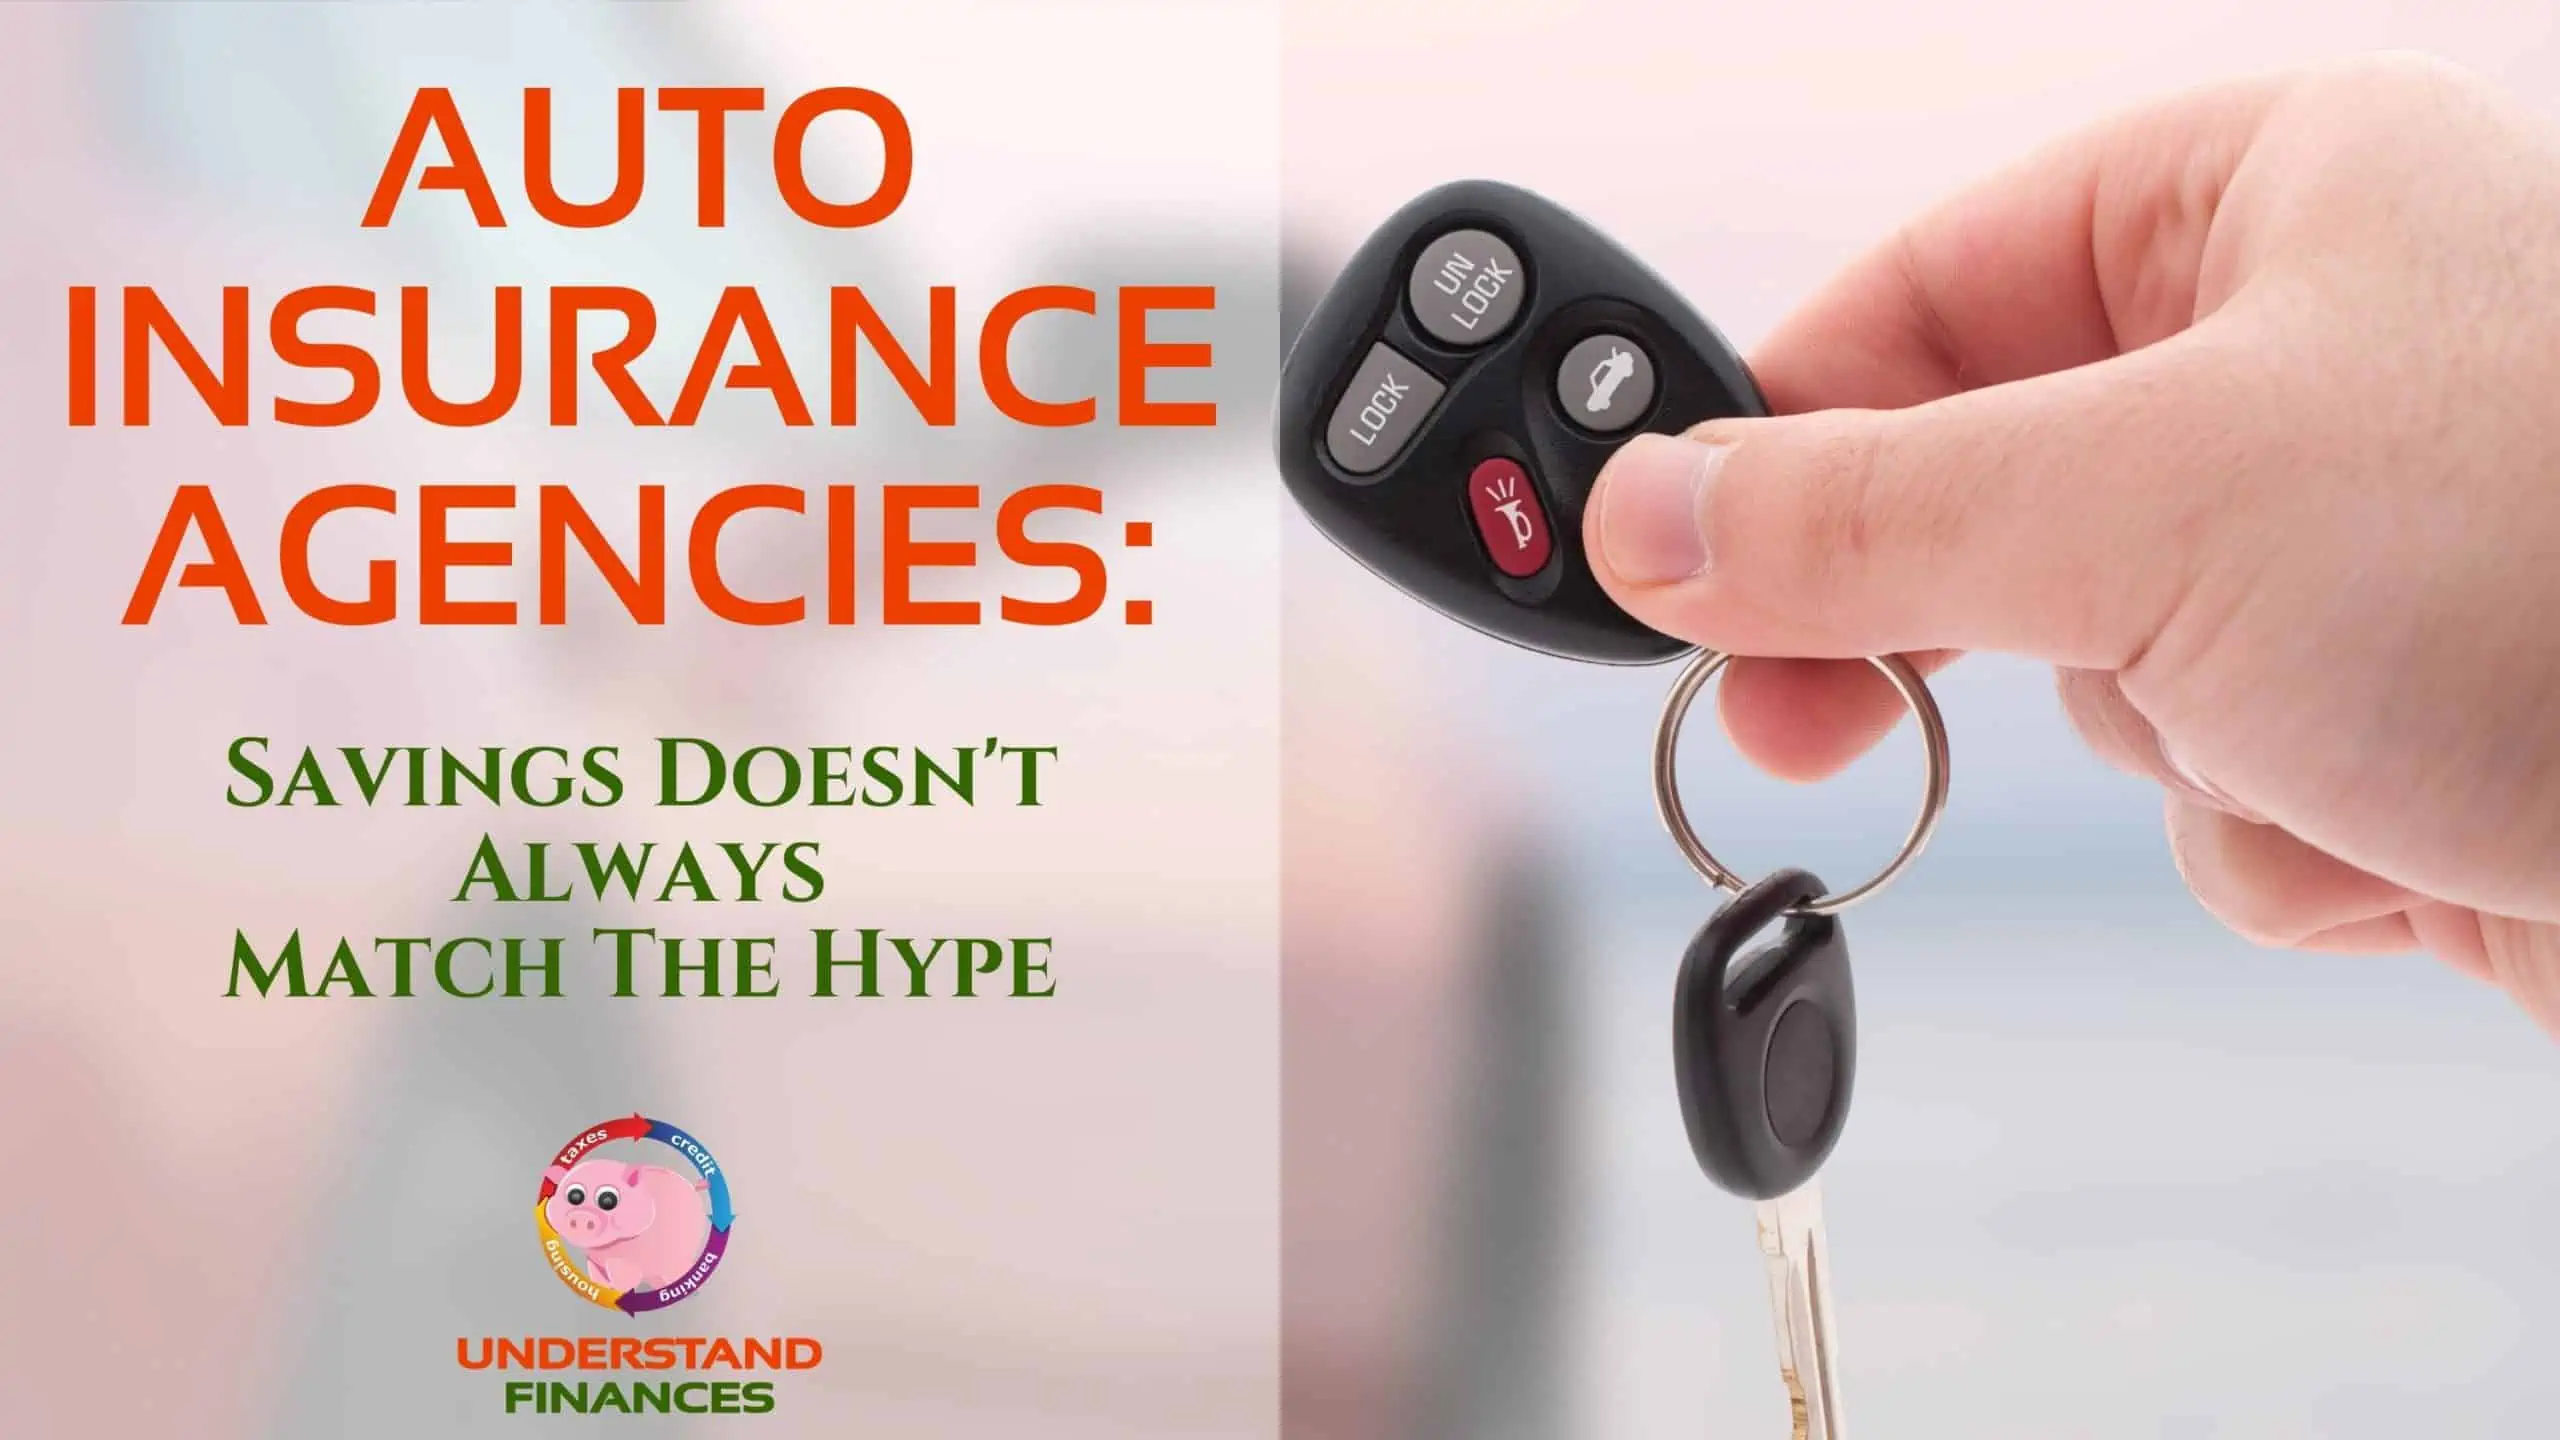 Auto Insurance Agencies: Savings Doesn’t Always Match The Hype